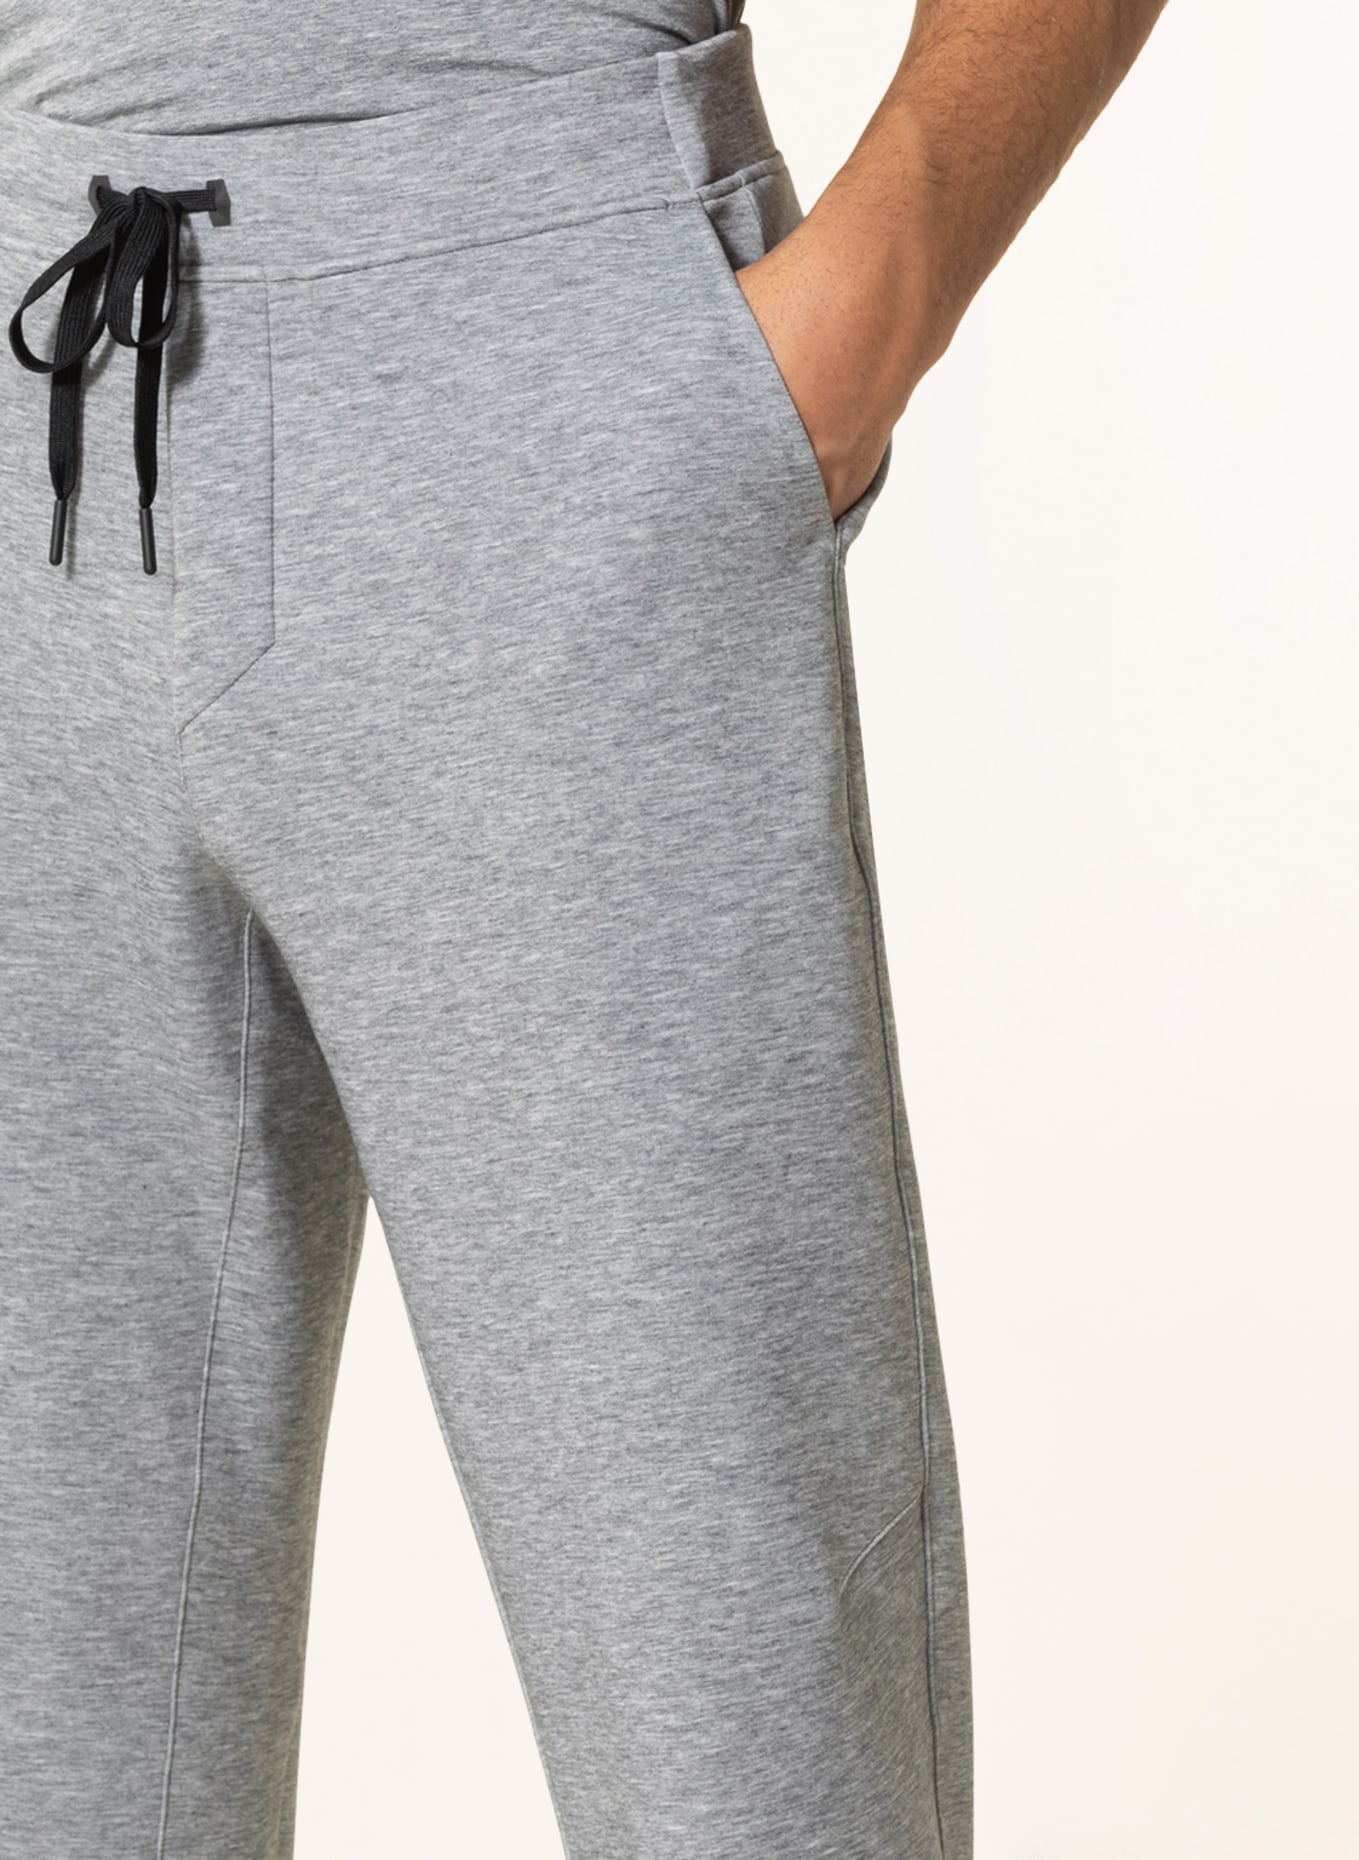 Sweatpants On in gray